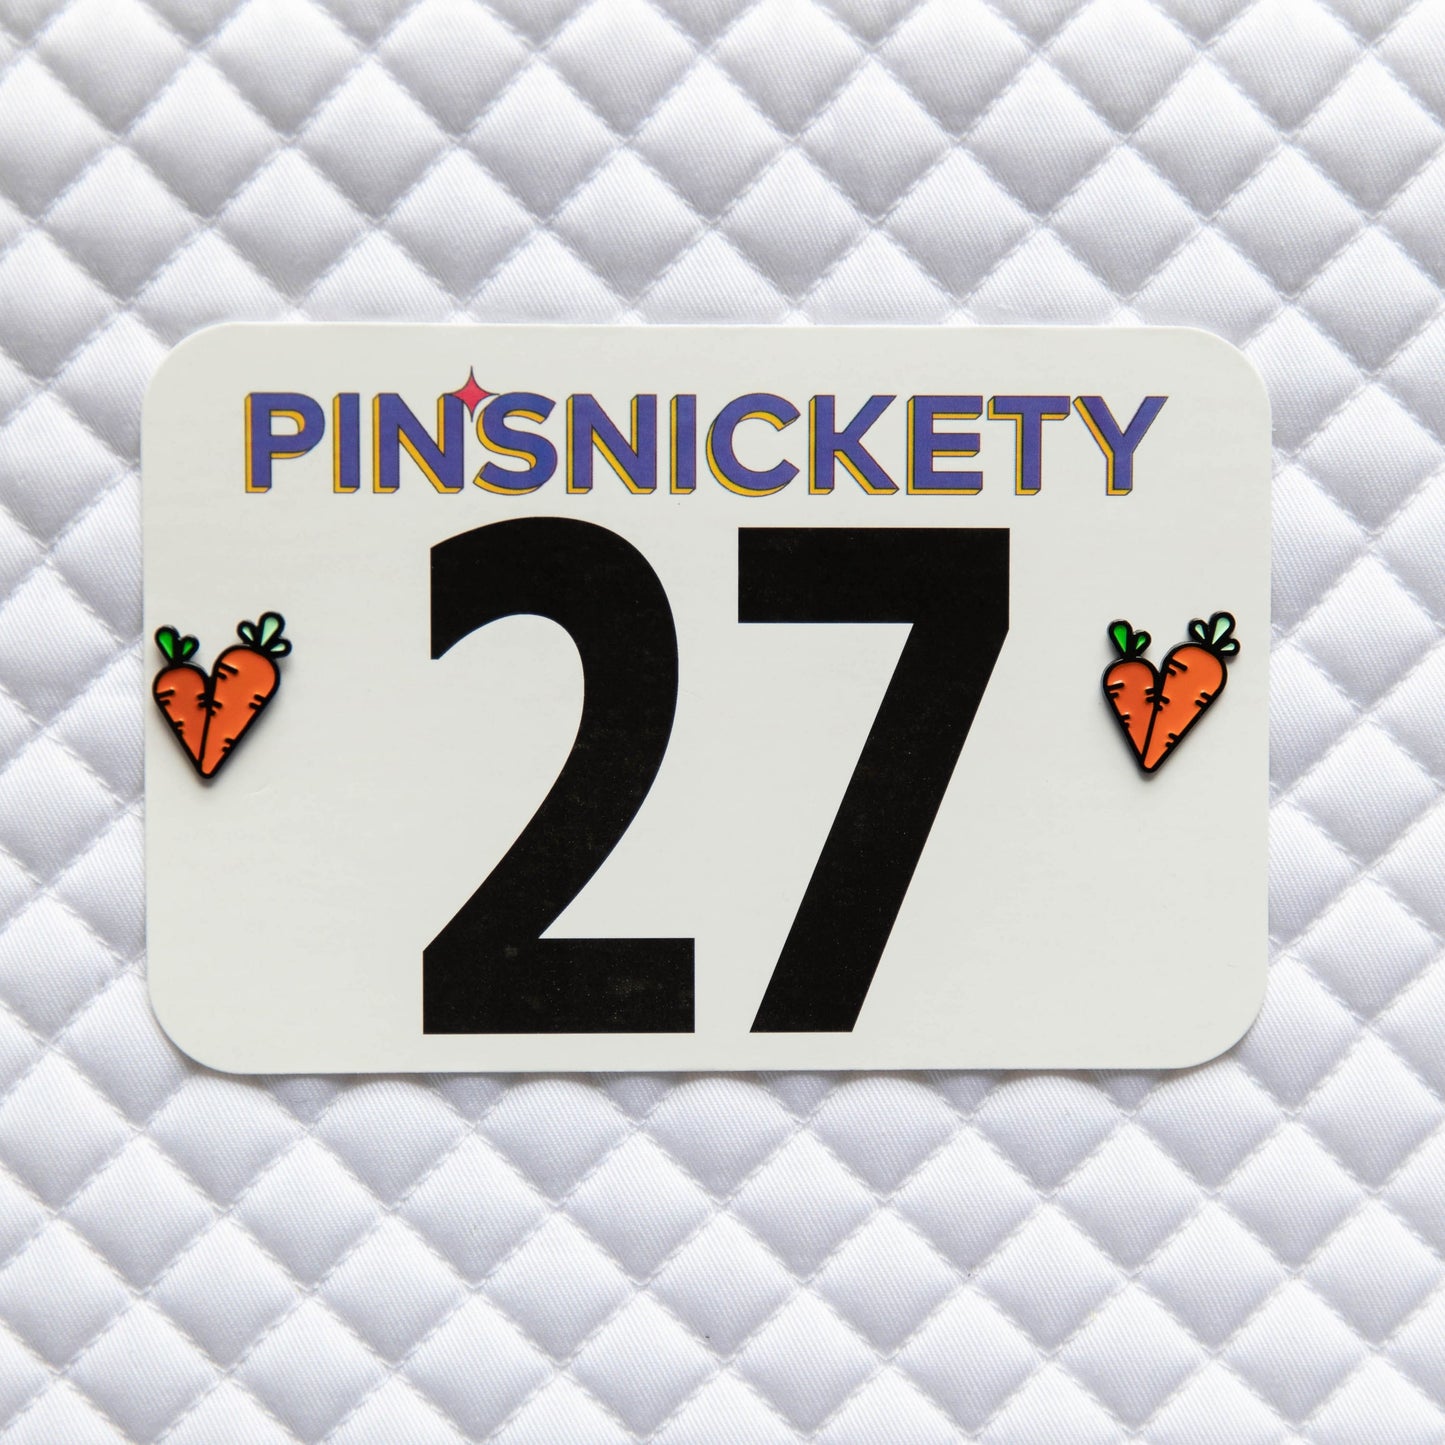 Pinsnickety Carrots horse show number pins on a saddle pad.